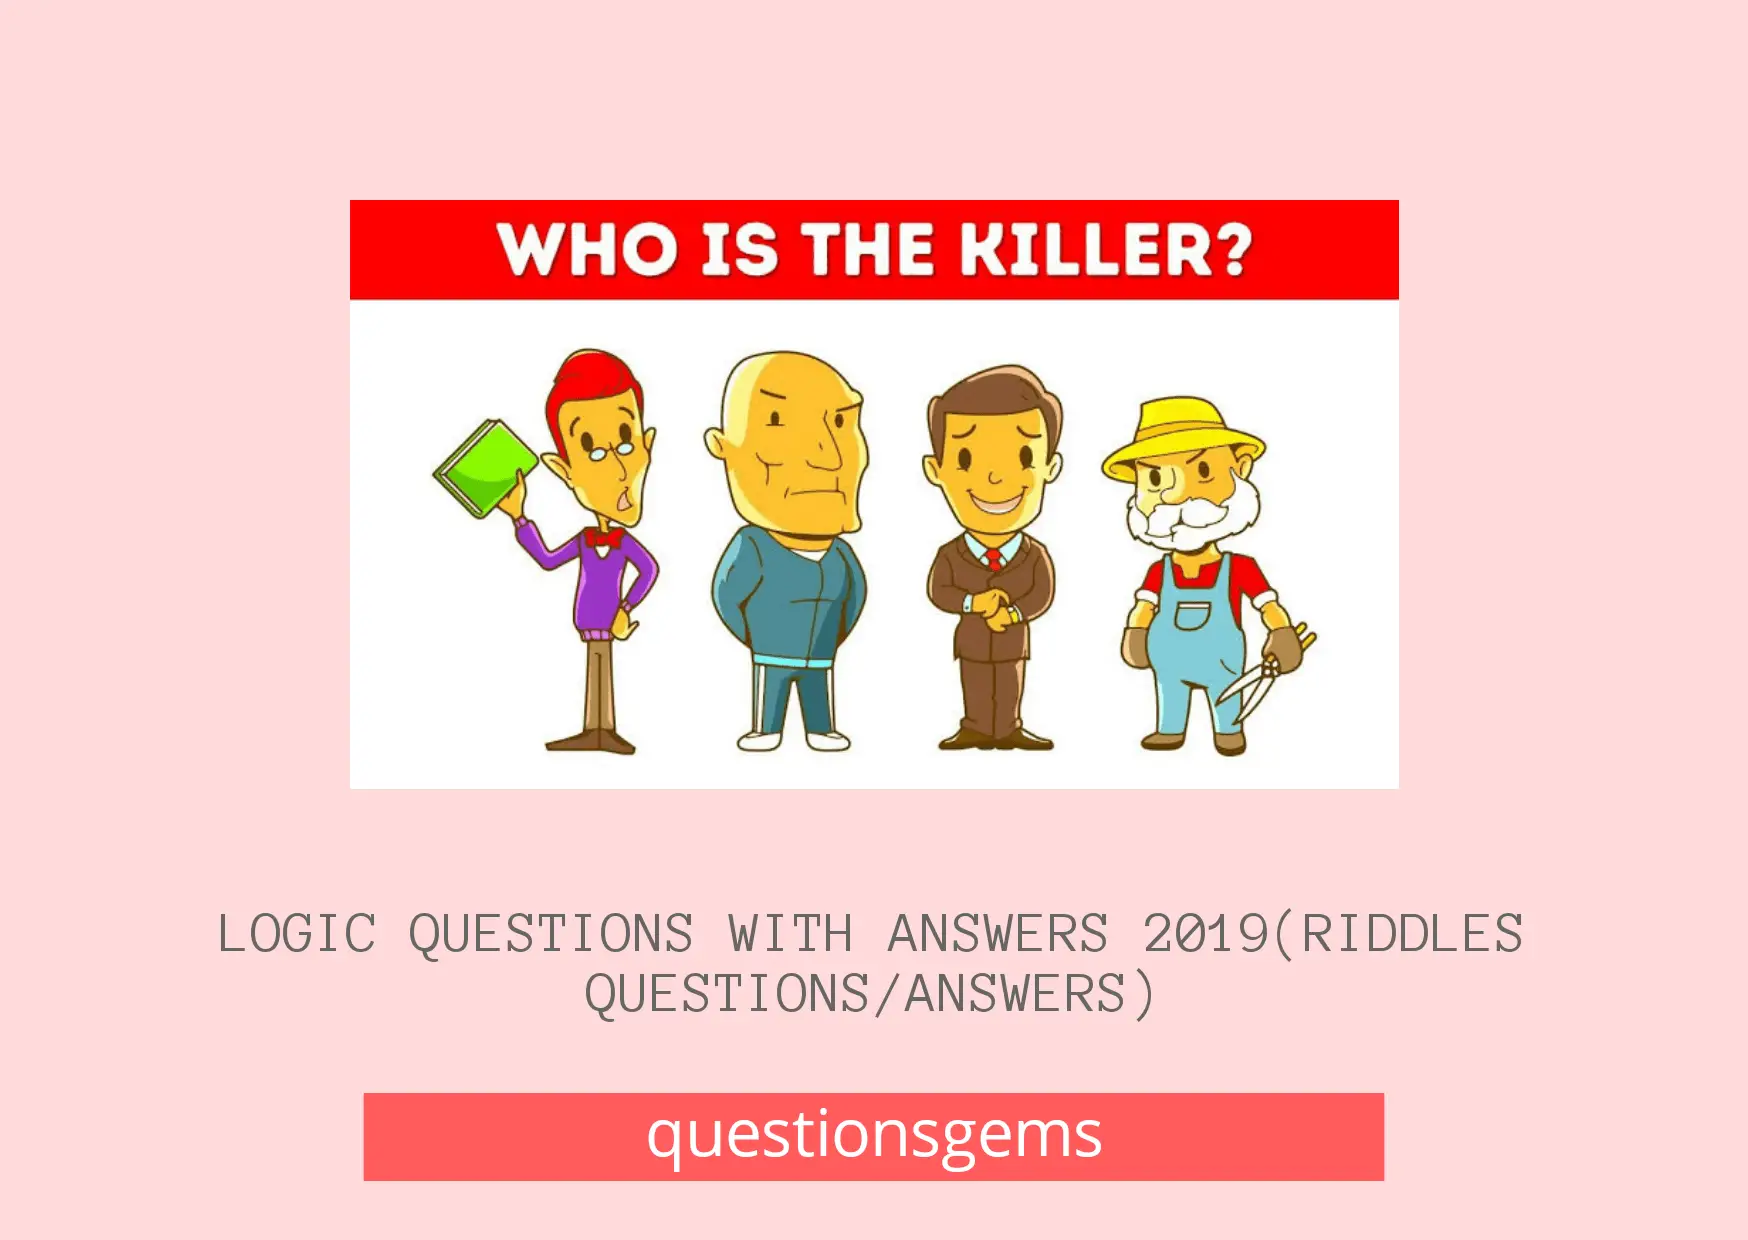 Logic Questions With Answers 2019